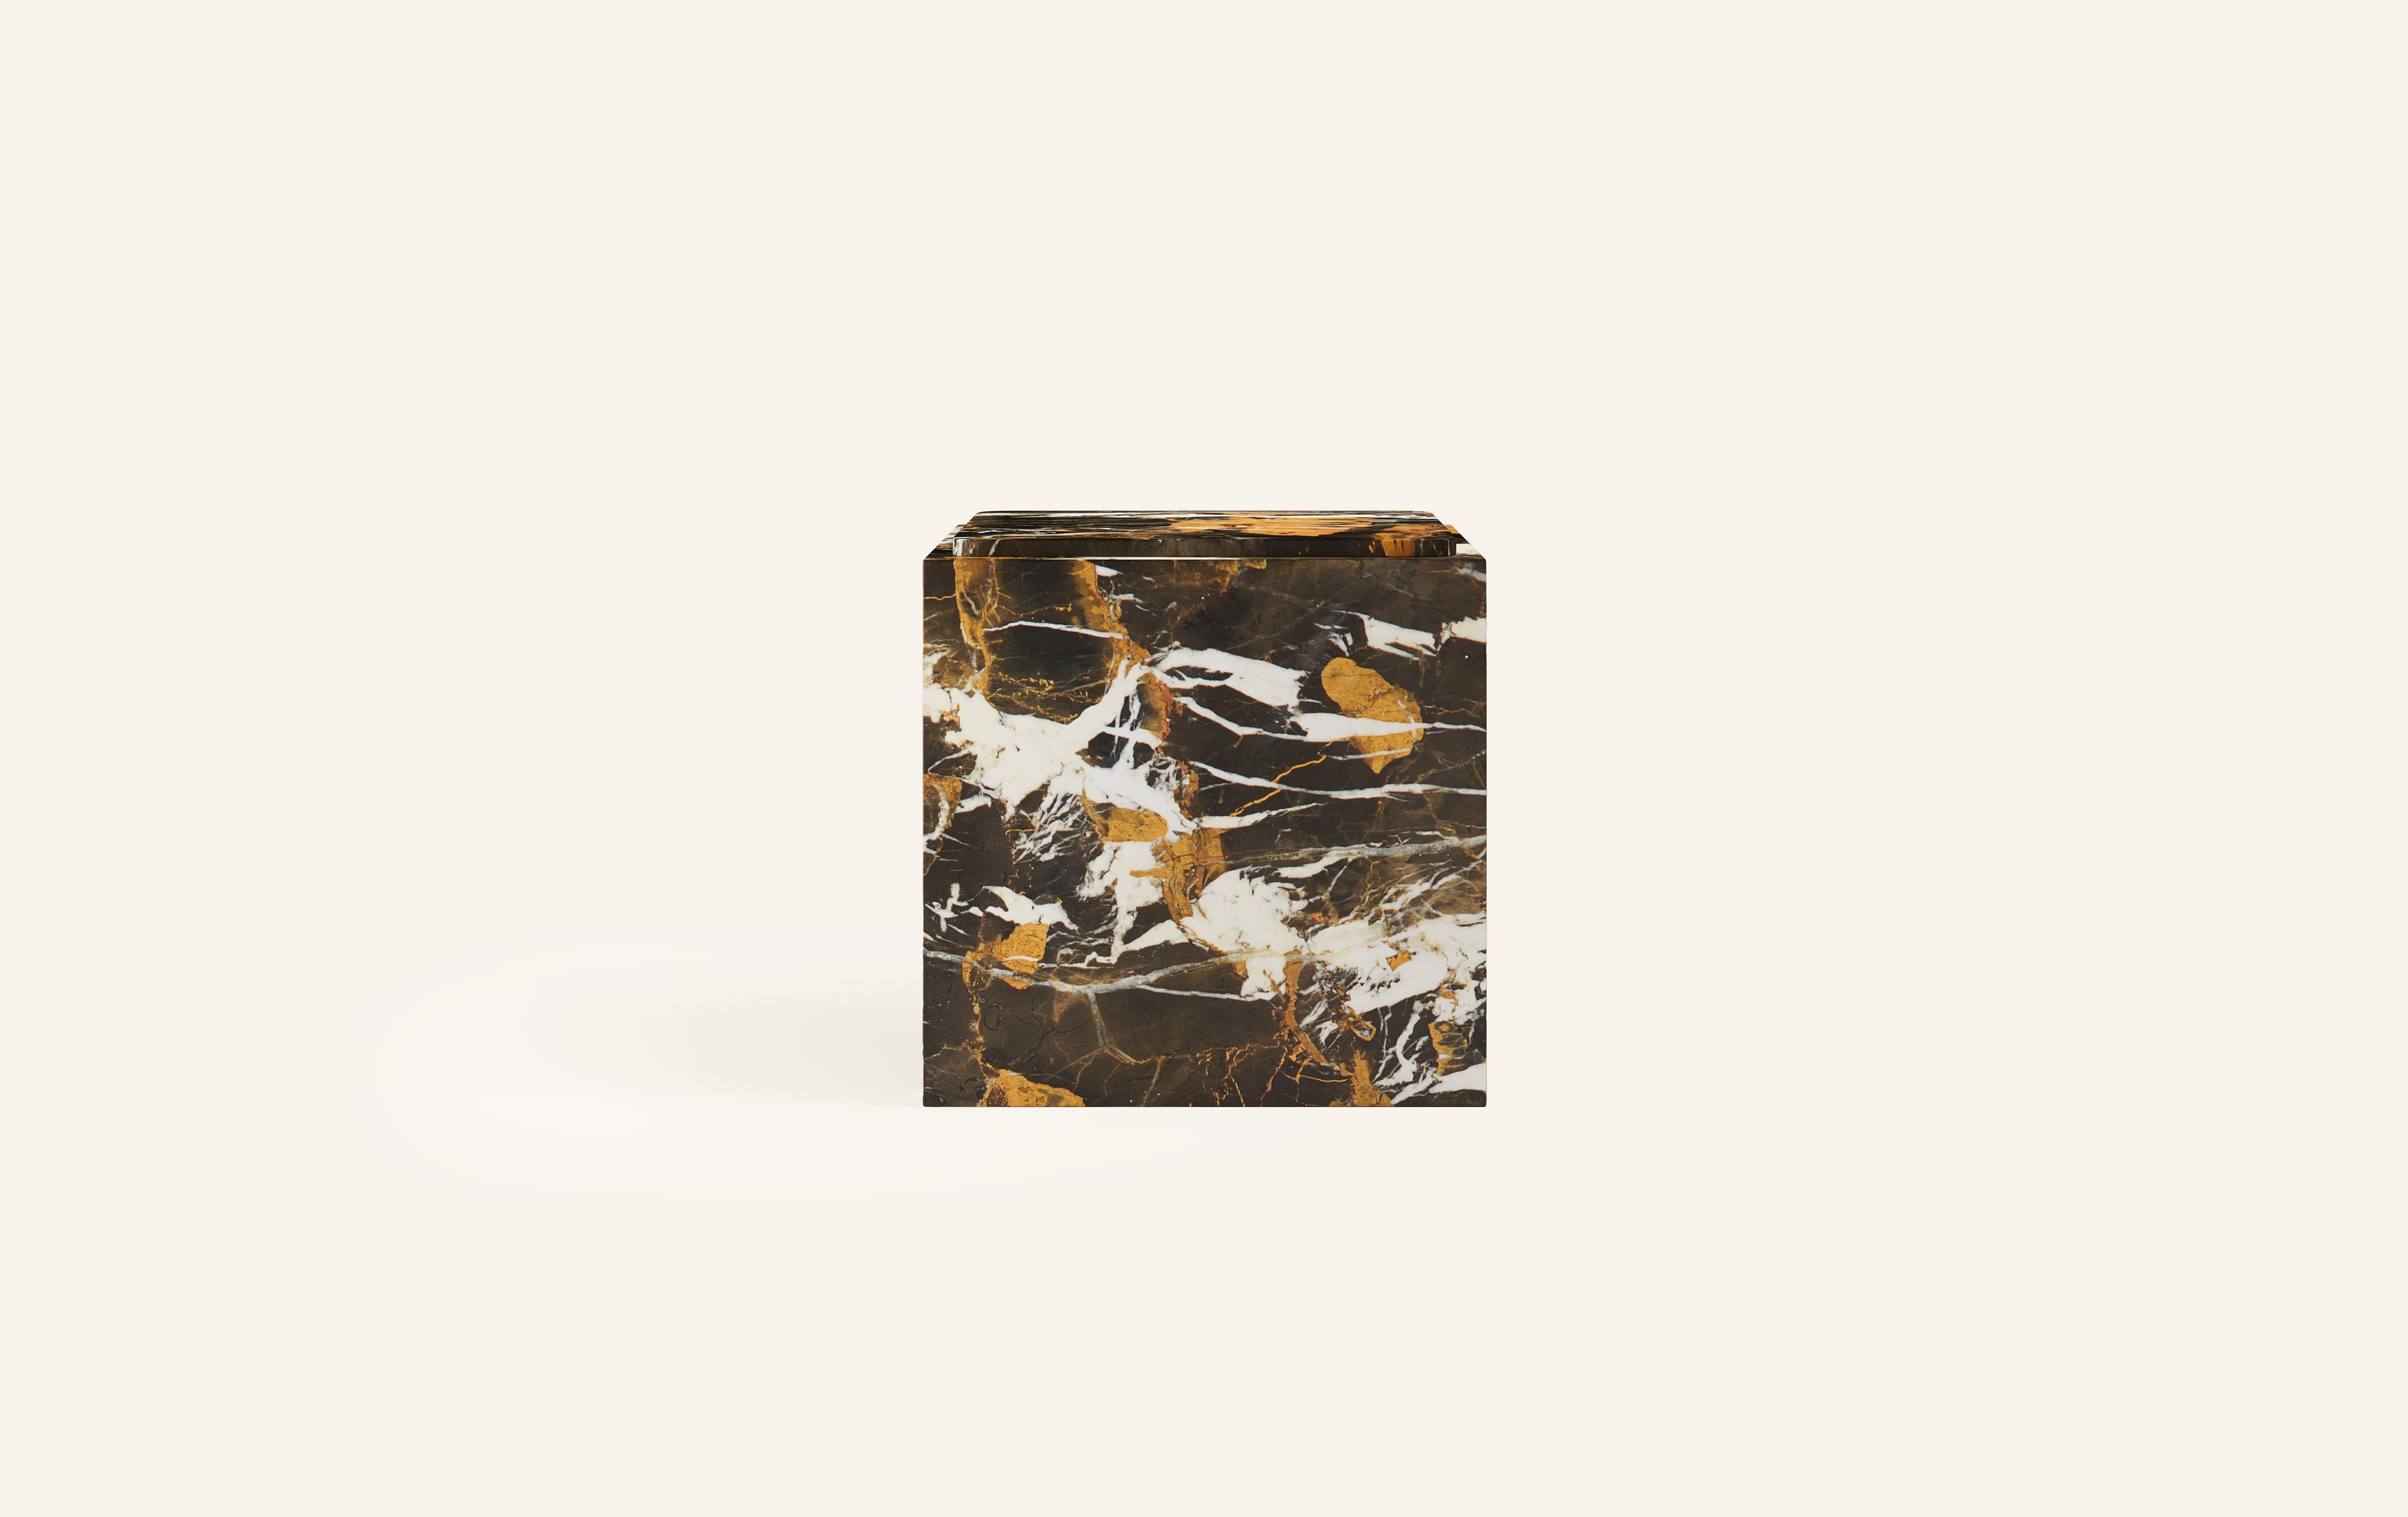 MONOLITHIC FORMS SOFTENED BY GENTLE EDGES. WITH ITS BOLD MARBLE PATTERNS CUBO IS AS VERSATILE AS IT IS STRIKING.

DIMENSIONS:
22”L x 22”W x 22”H:
- 3/4